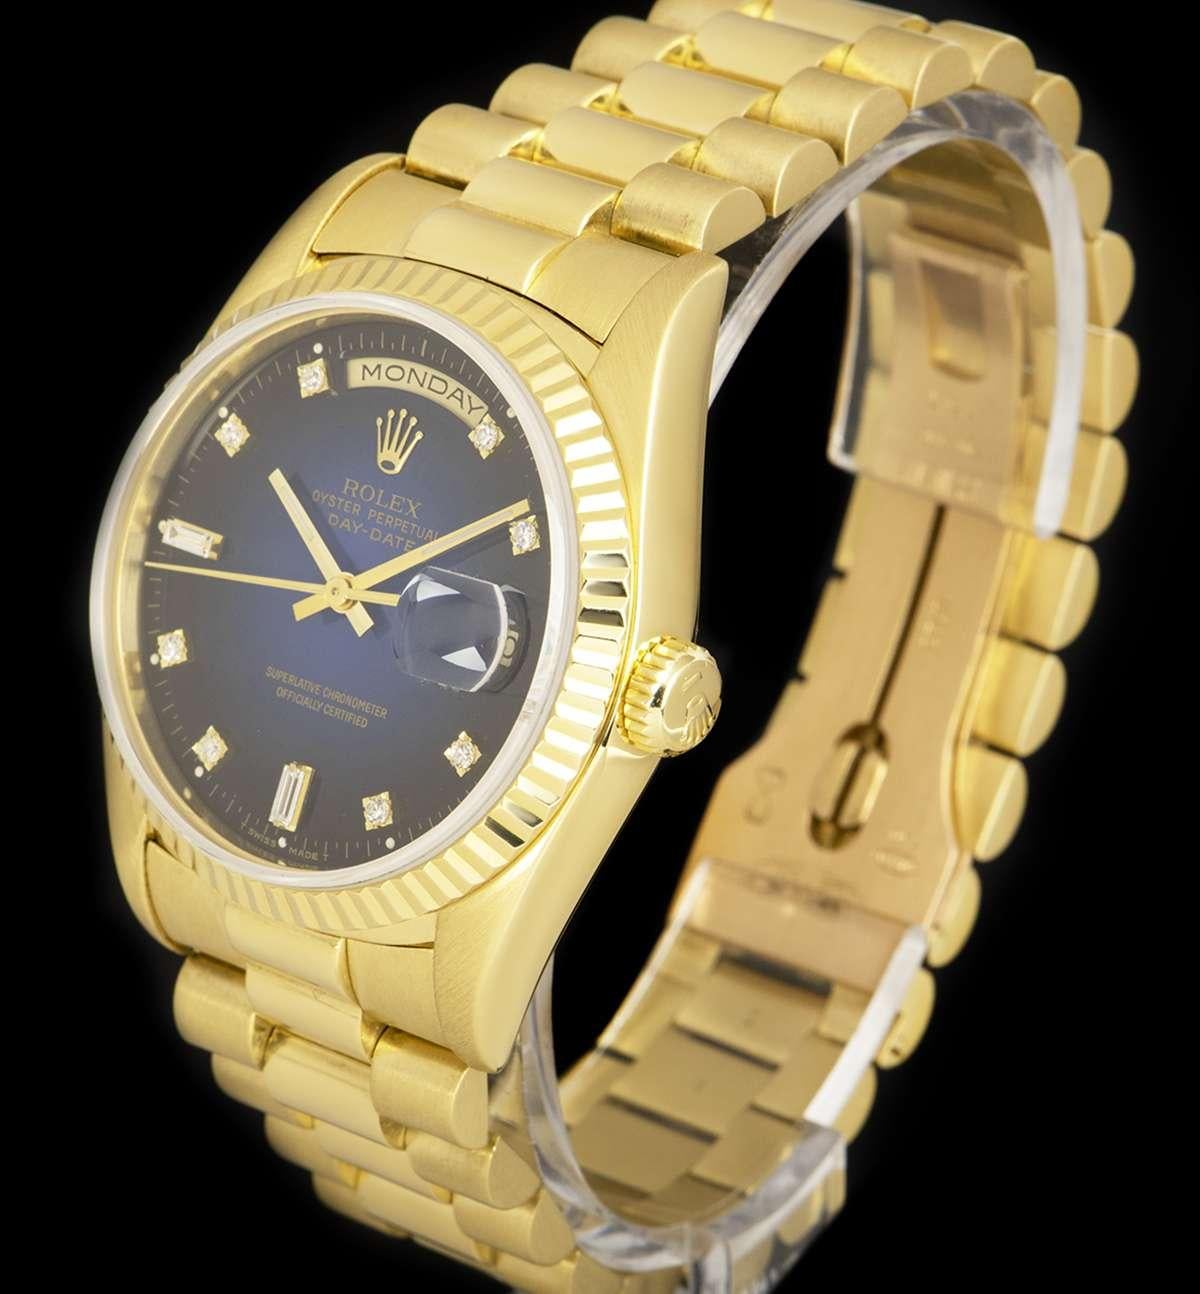 An 18k Yellow Gold Oyster Perpetual Day-Date Gents Wristwatch, blue vignette dial set with 8 applied round brilliant cut diamond hour markers and 2 baguette cut diamond hour markers, day aperture at 12 0'clock, date aperture at 3 0'clock, a fixed